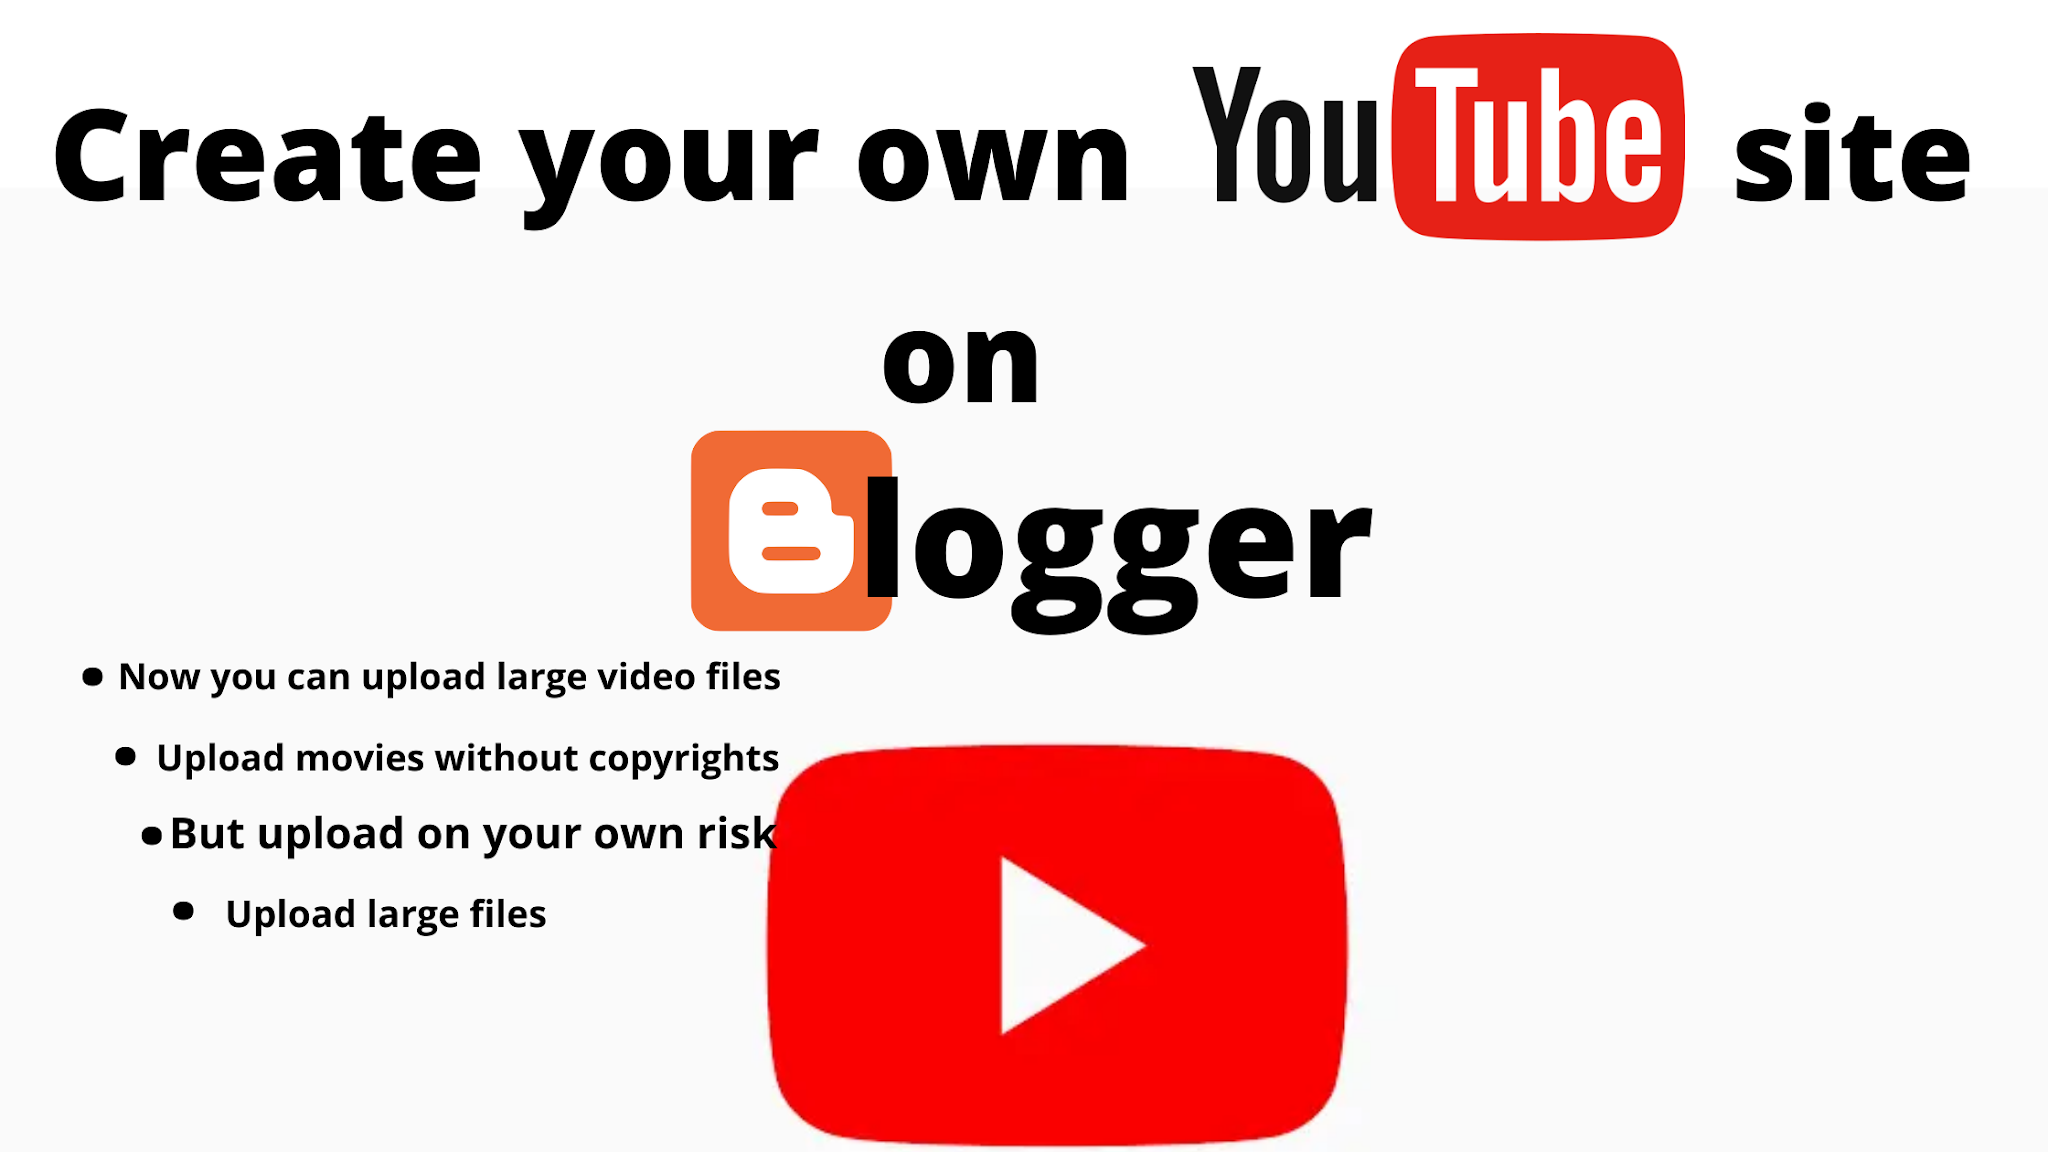 Create your YouTube site on blogger for free